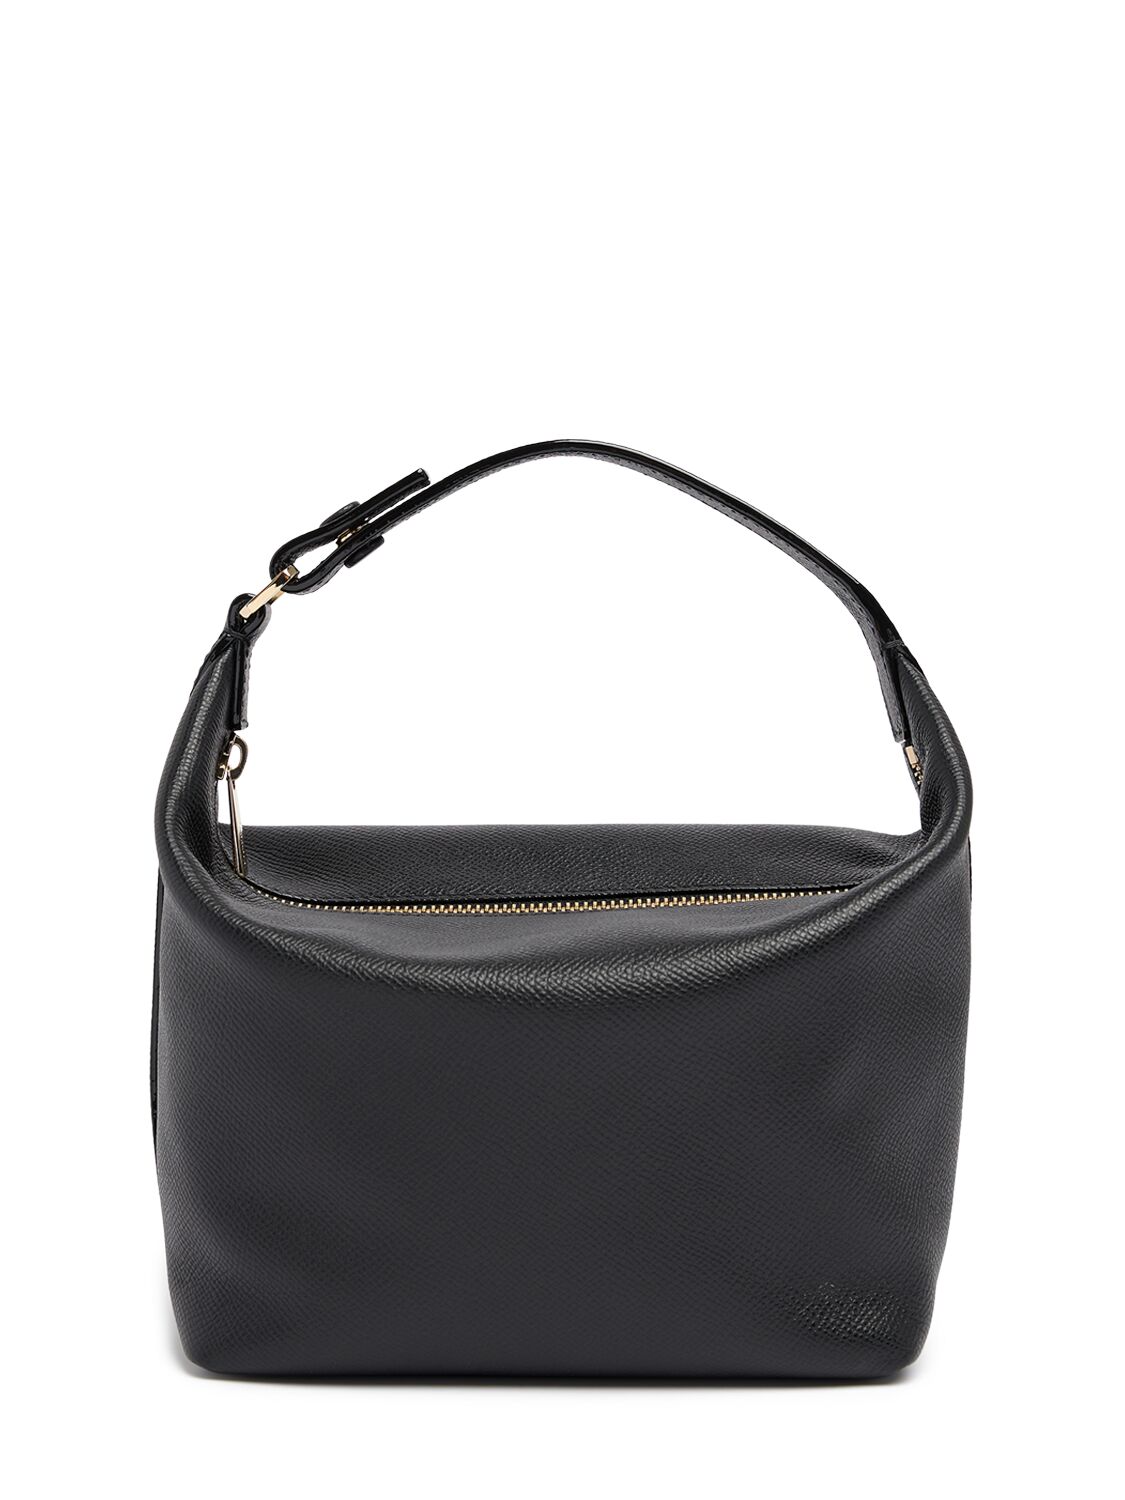 Valextra Mochi Leather Top Handle Bag In Black